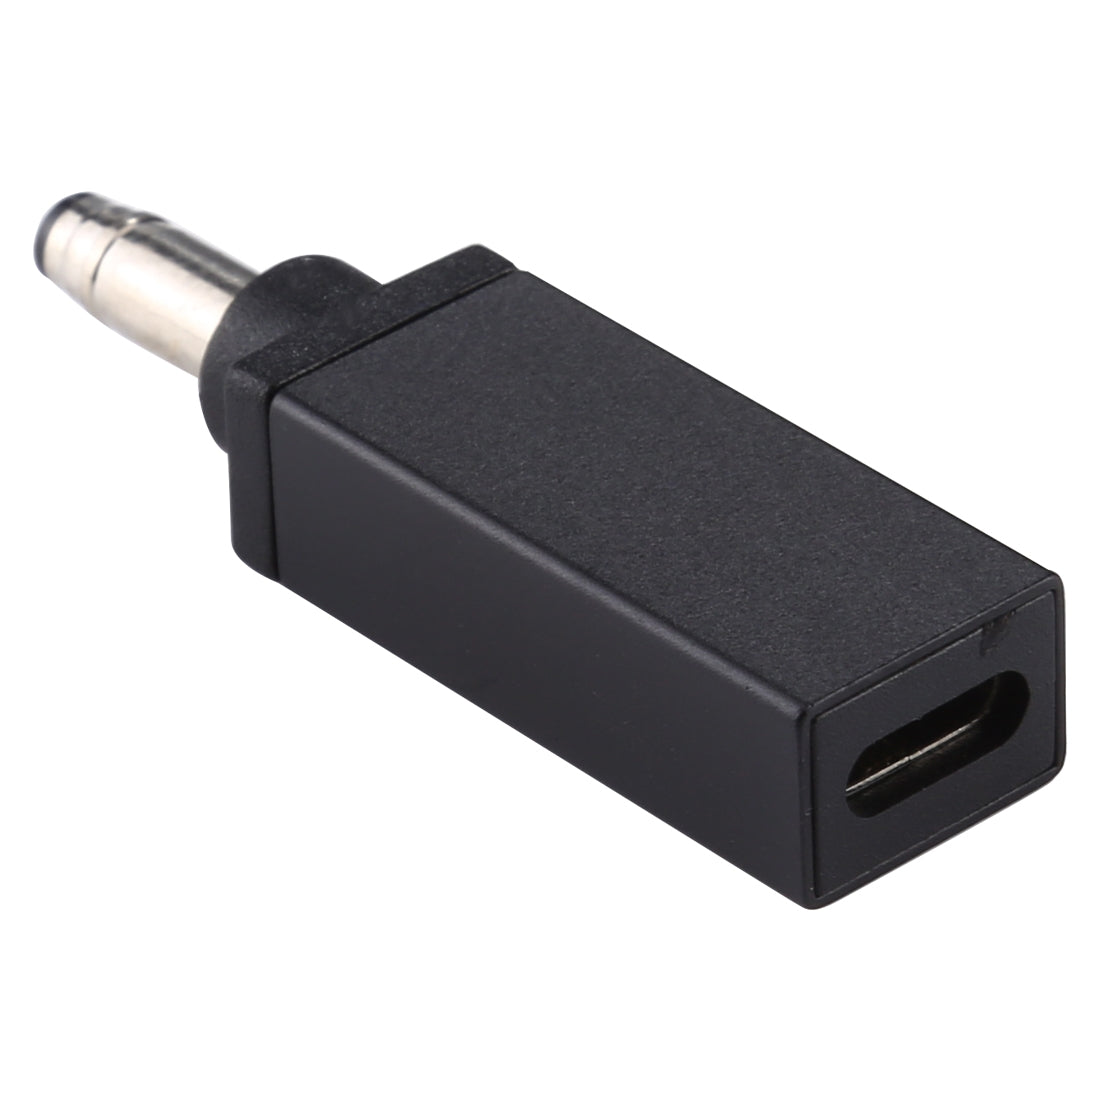 PD 18.5V-20V 4.8x1.7mm Male Adapter Connector